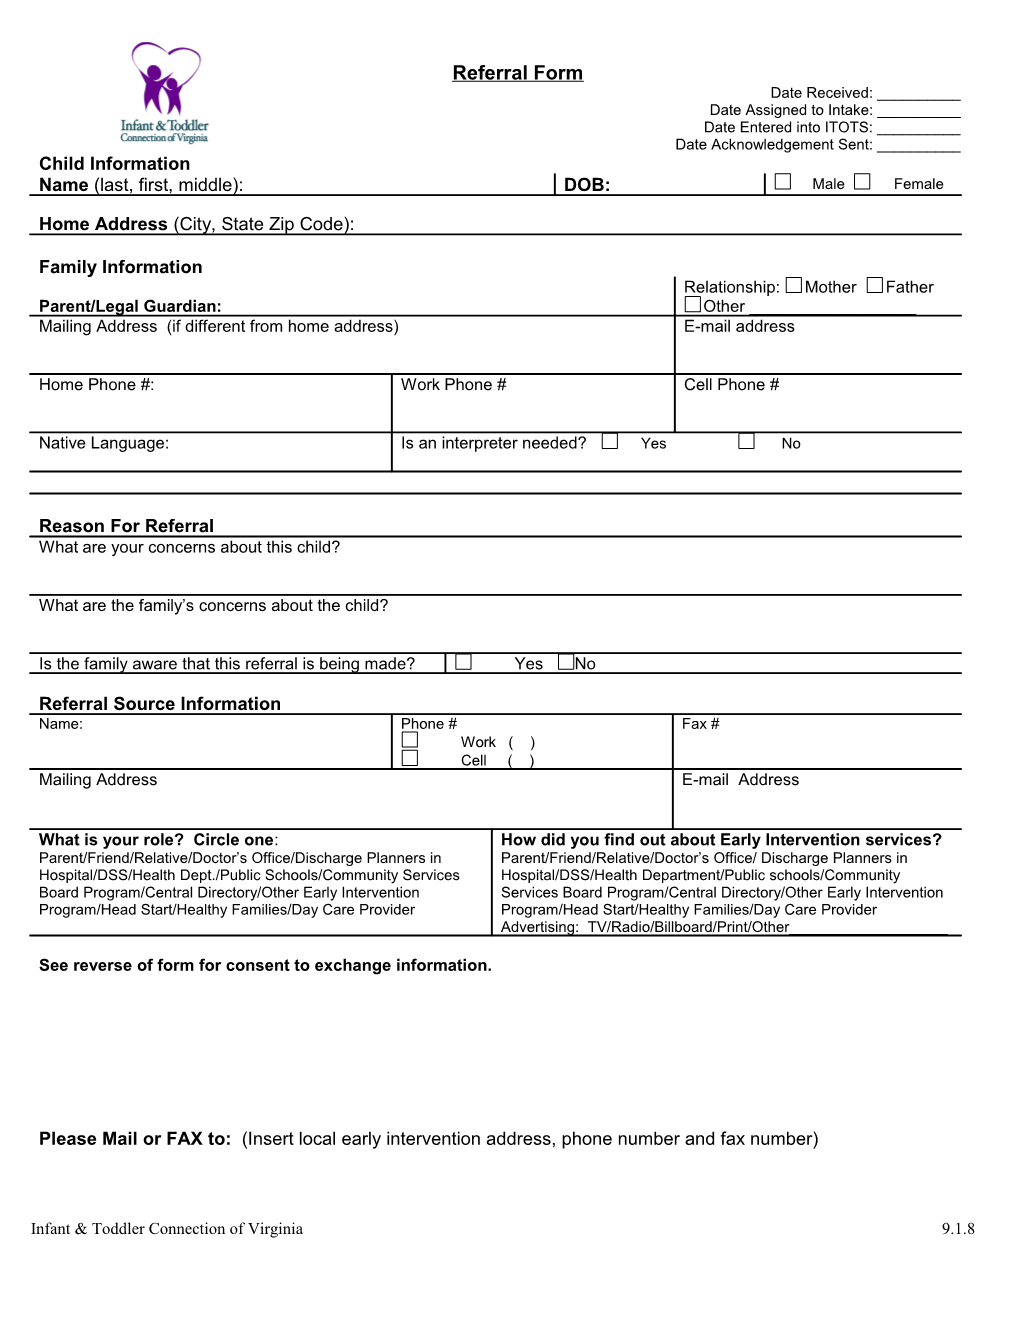 Referral Form to the Infant & Toddler Connection